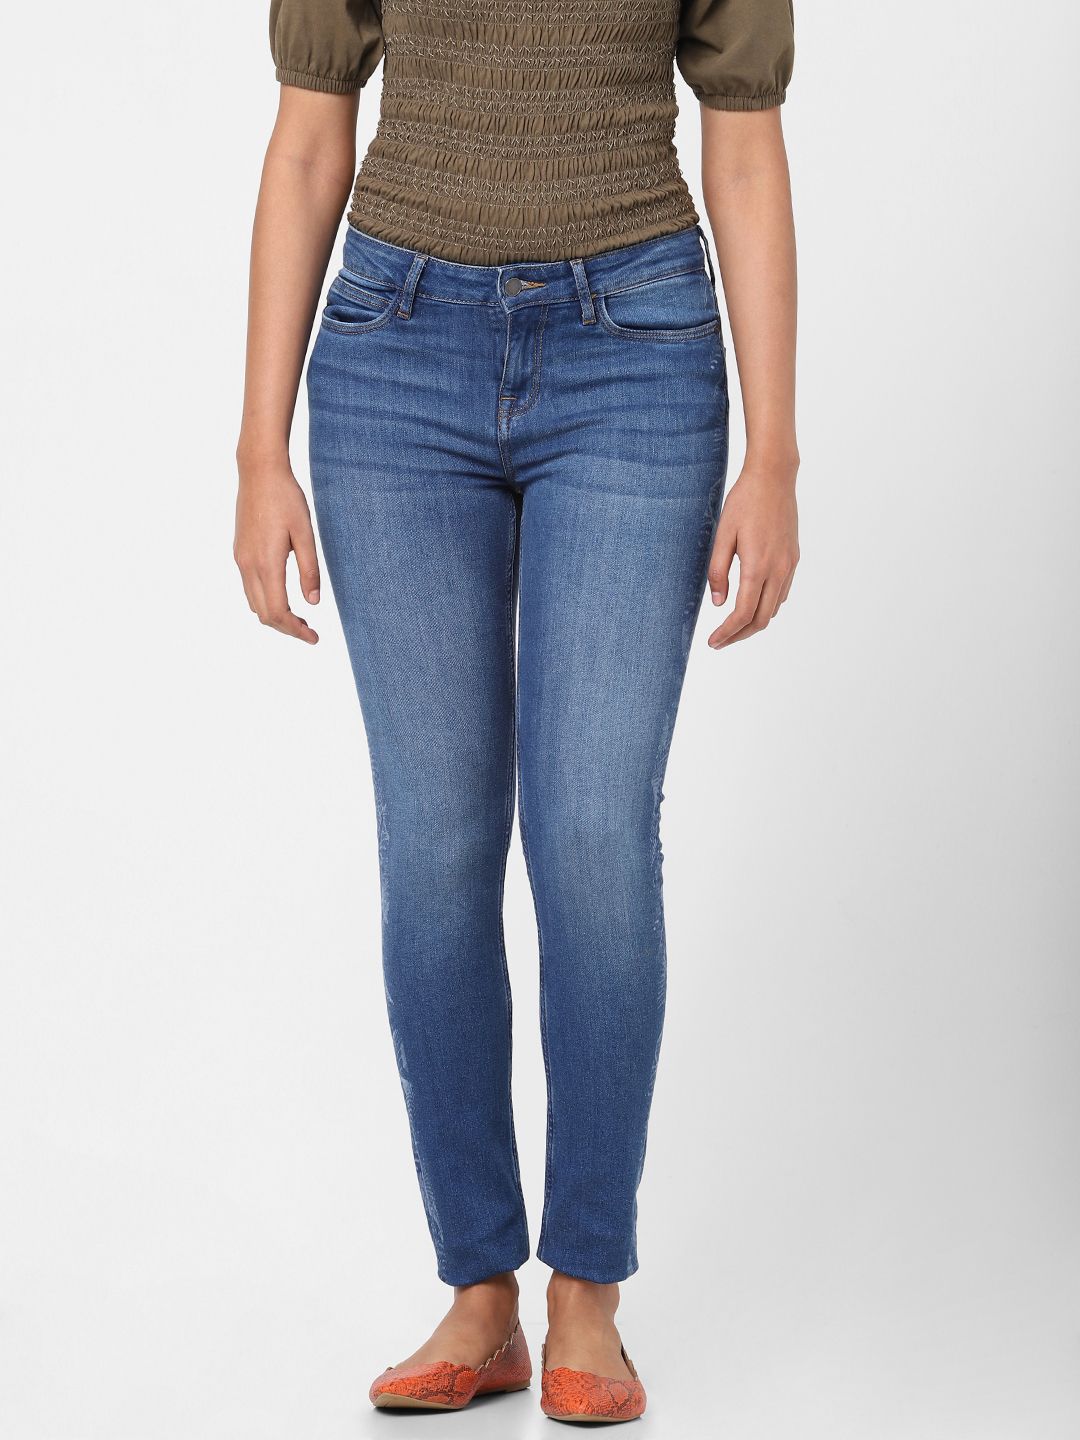 Vero Moda Women Blue Skinny Fit Light Fade Mid-Rise Printed Stretchable Jeans Price in India